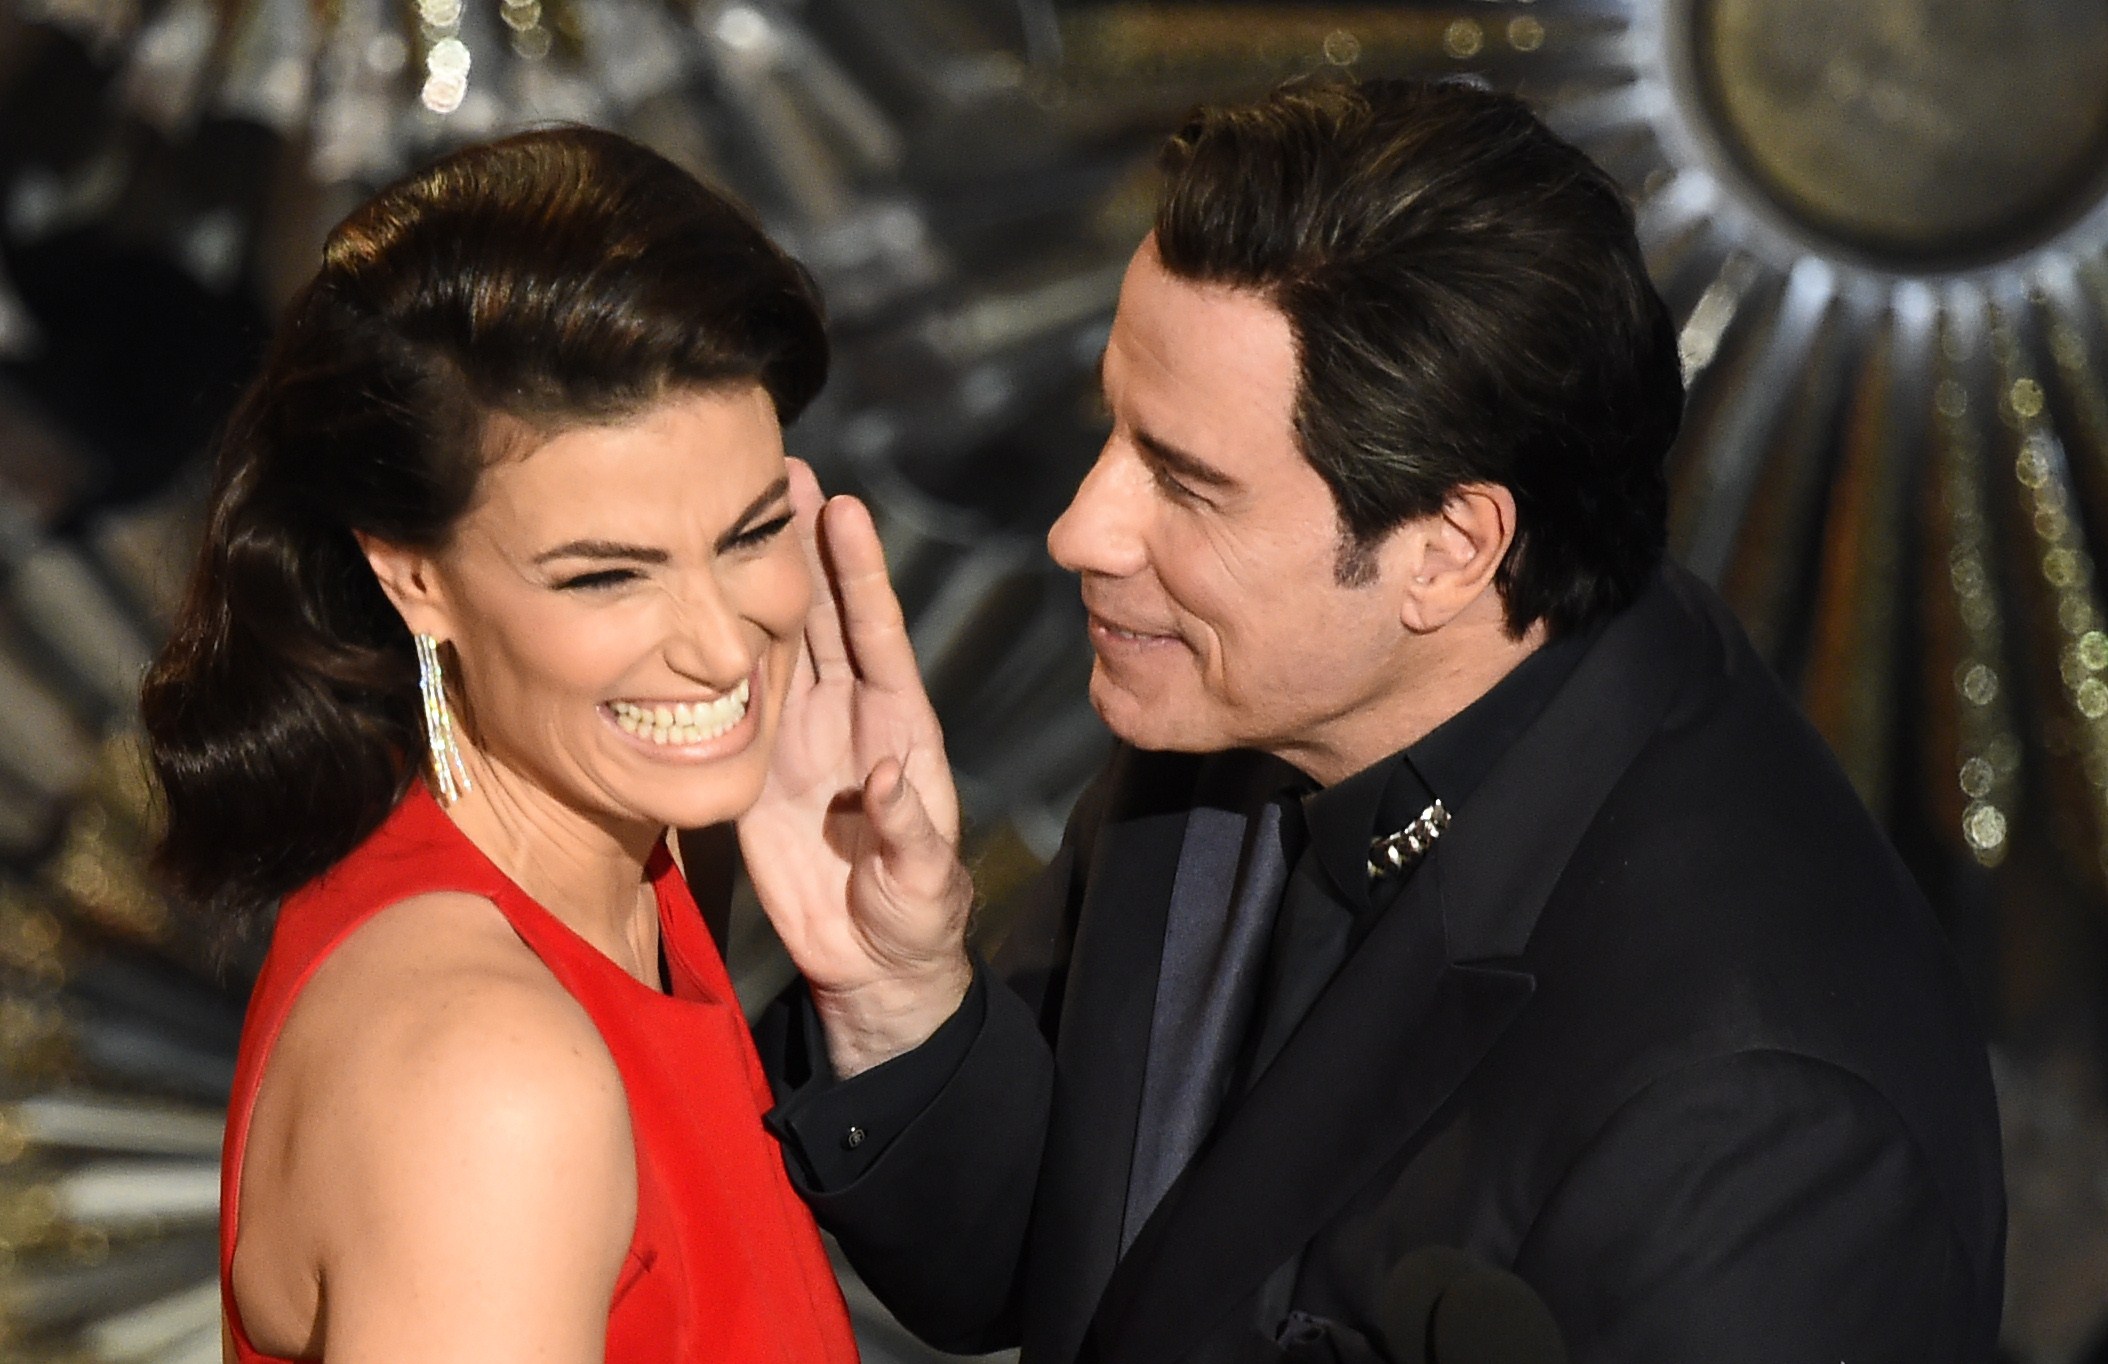 PHOTO: John Travolta (R) and Idina Menzel present an award on stage at the 87th Academy Awards, Feb. 22, 2015 in Hollywood, California. 